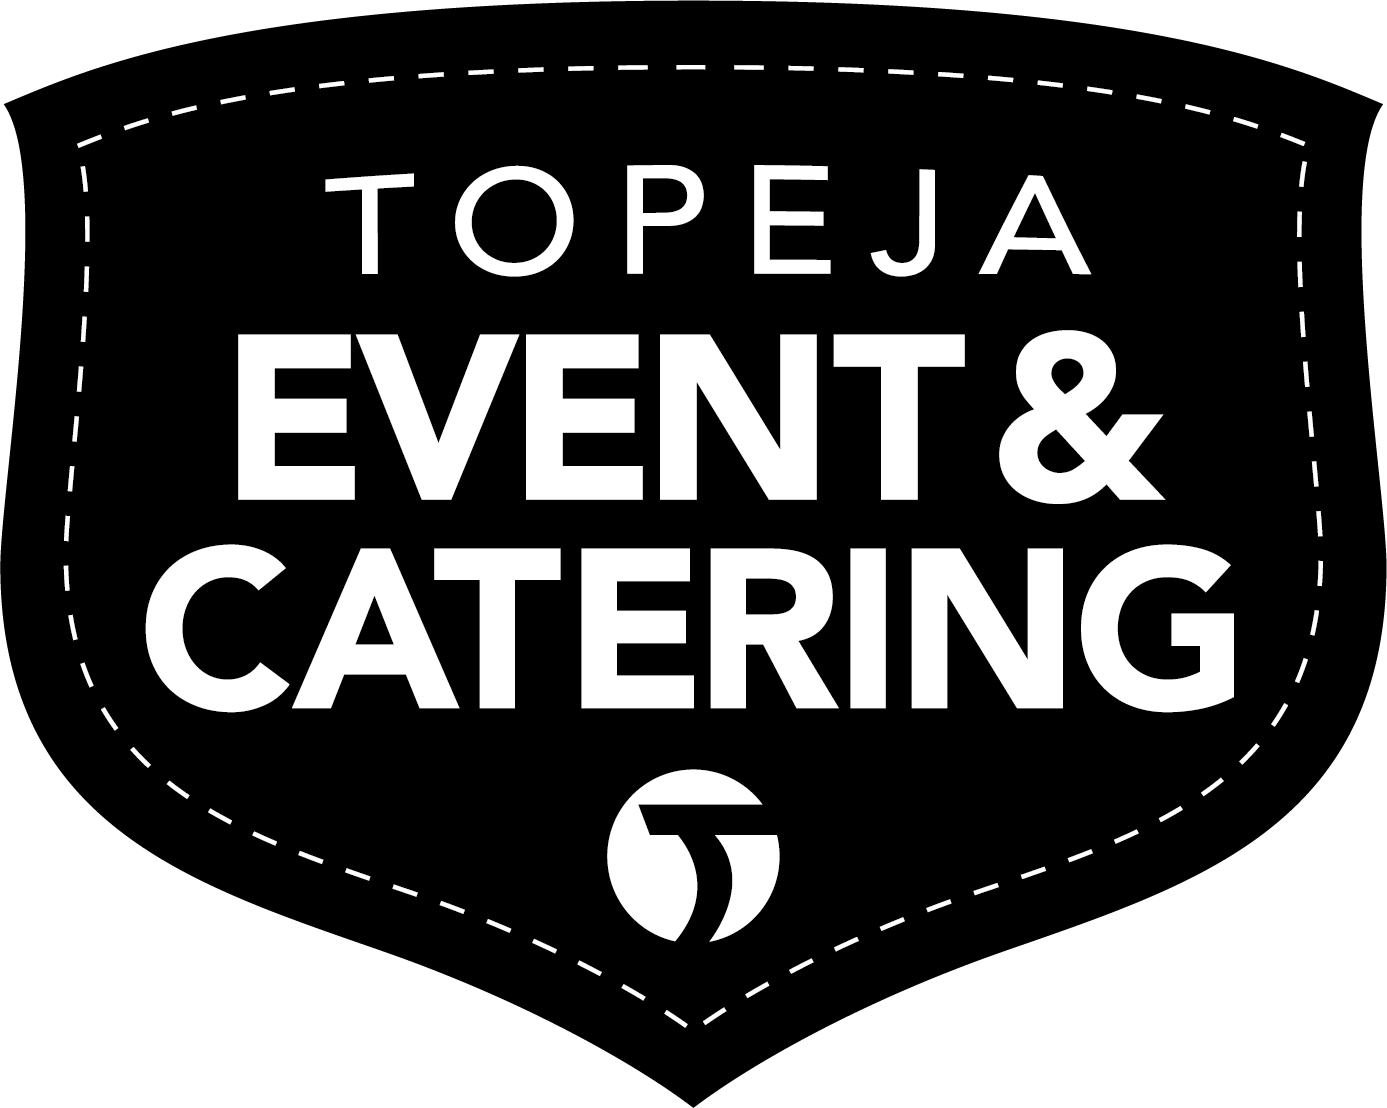 Topeja Event & catering